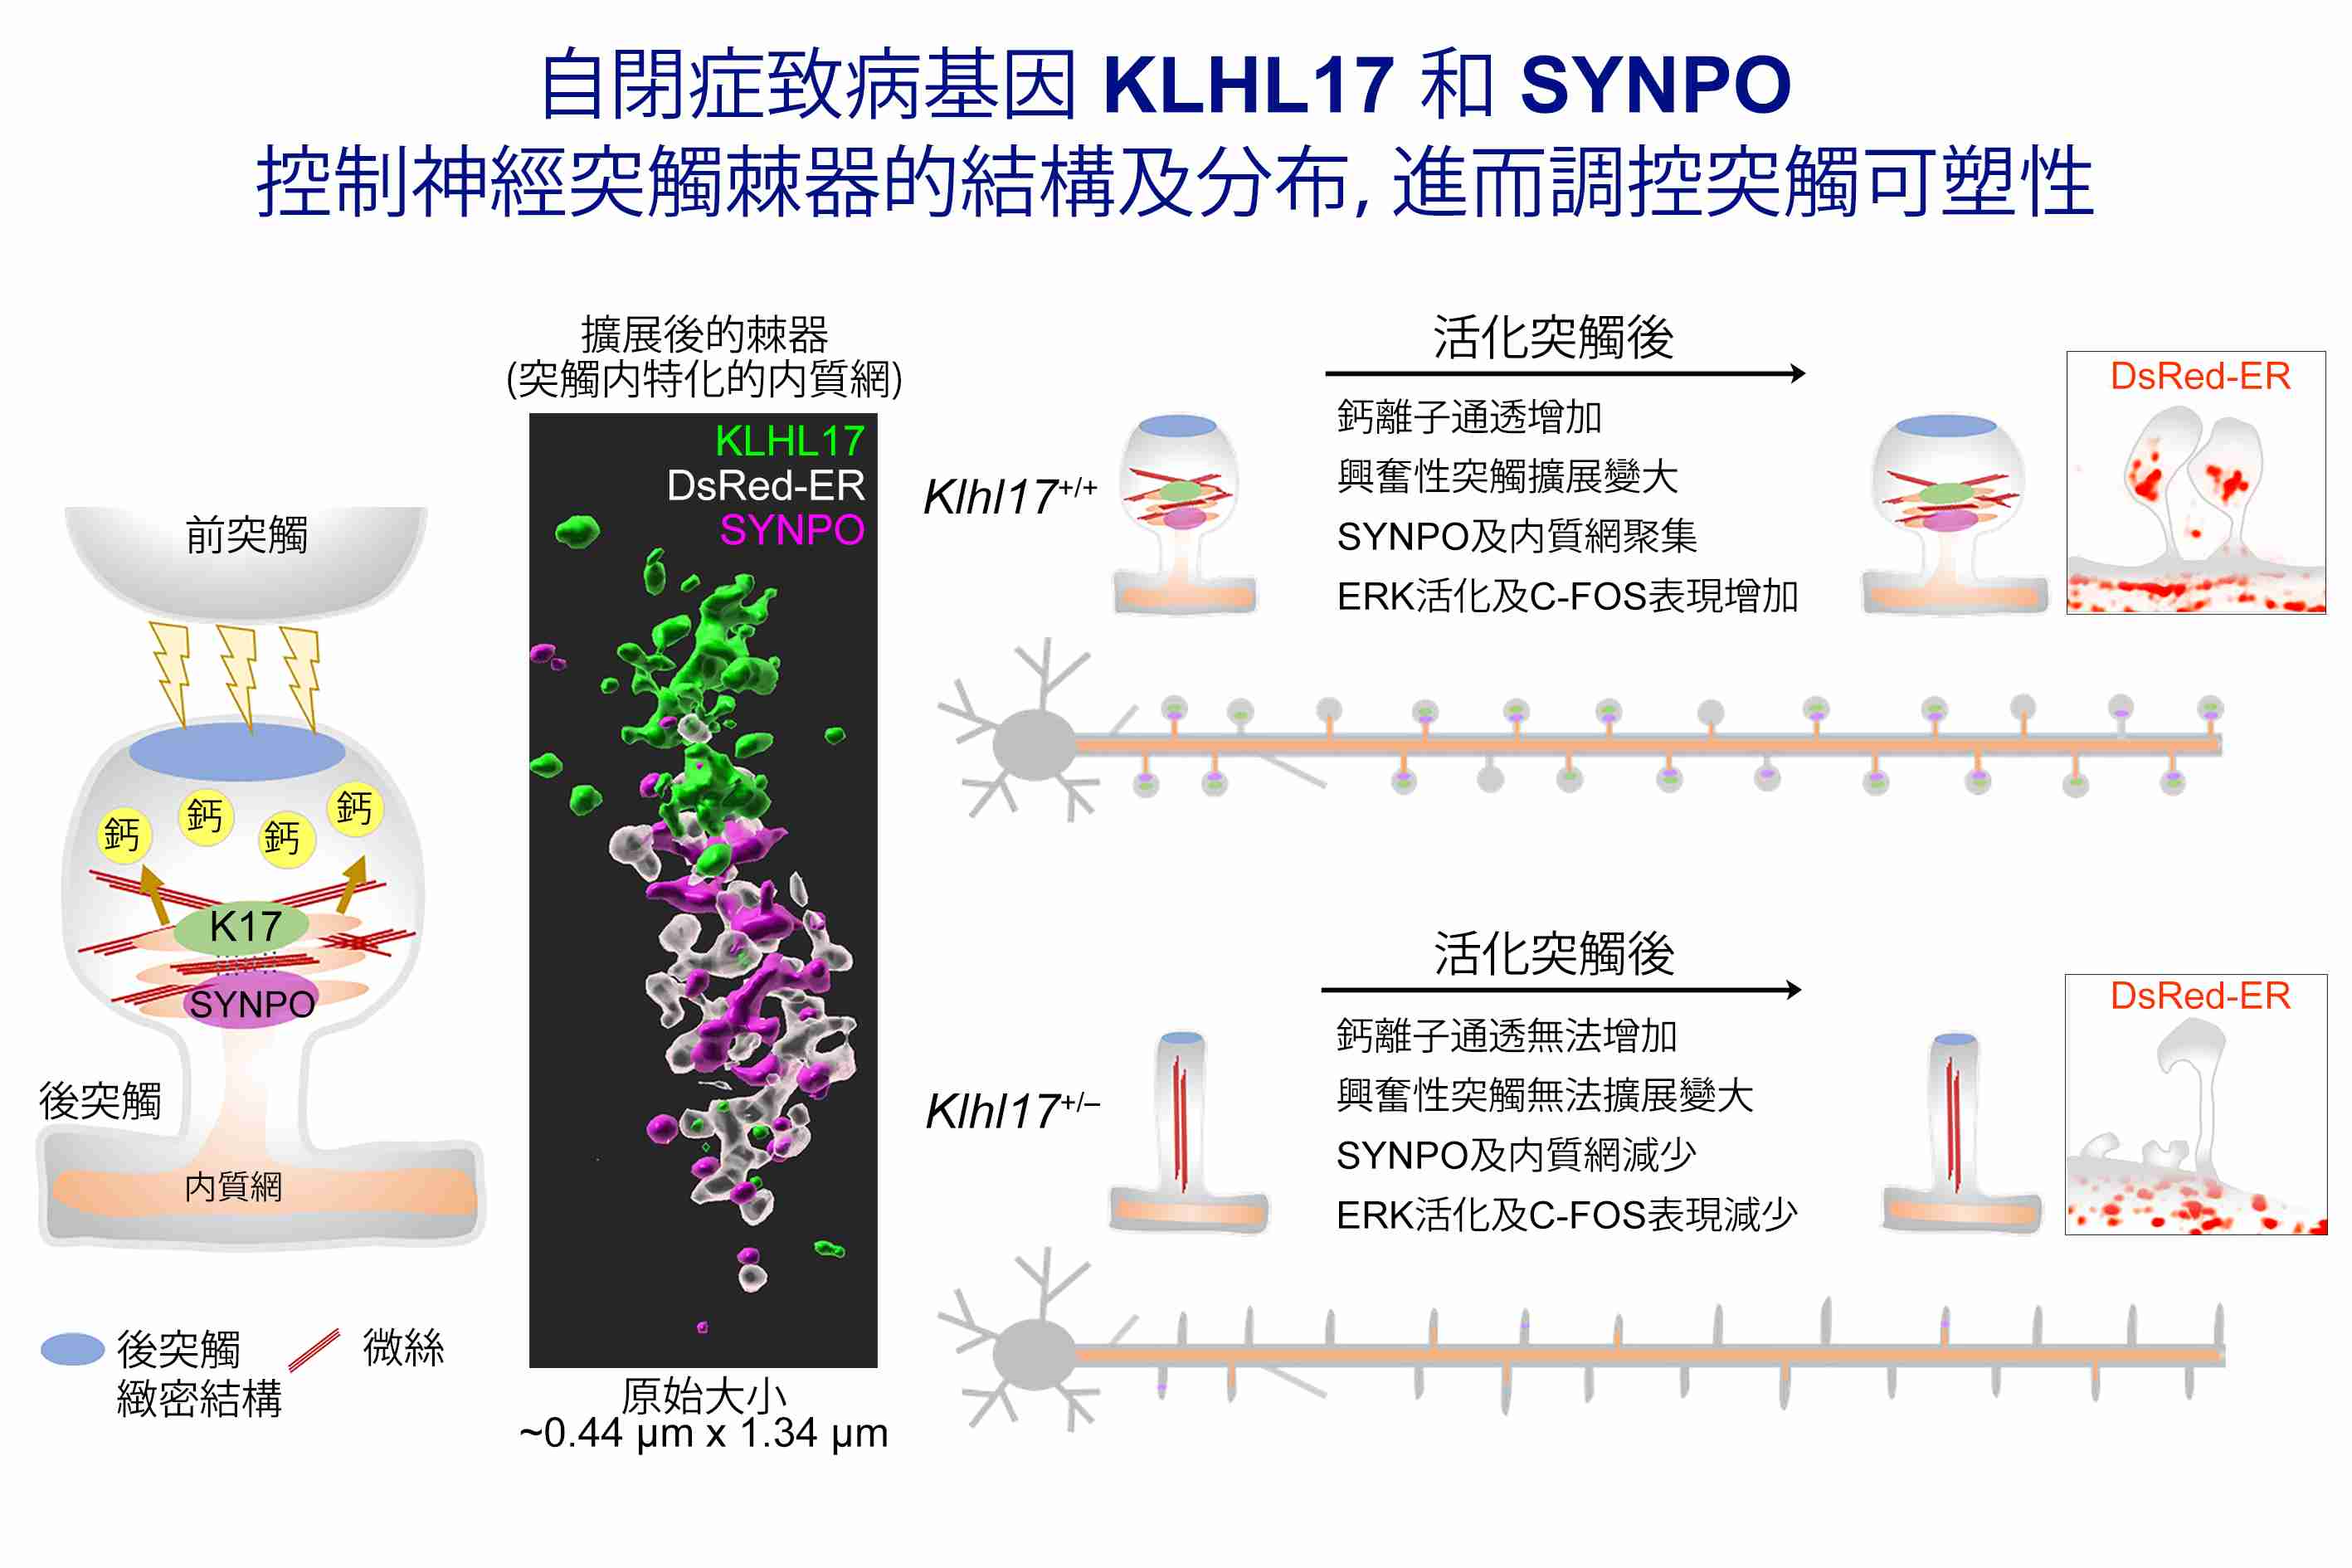 Autism-related KLHL17 and SYNPO act in concert to control activity-dependent dendritic spine enlargement and the spine apparatus